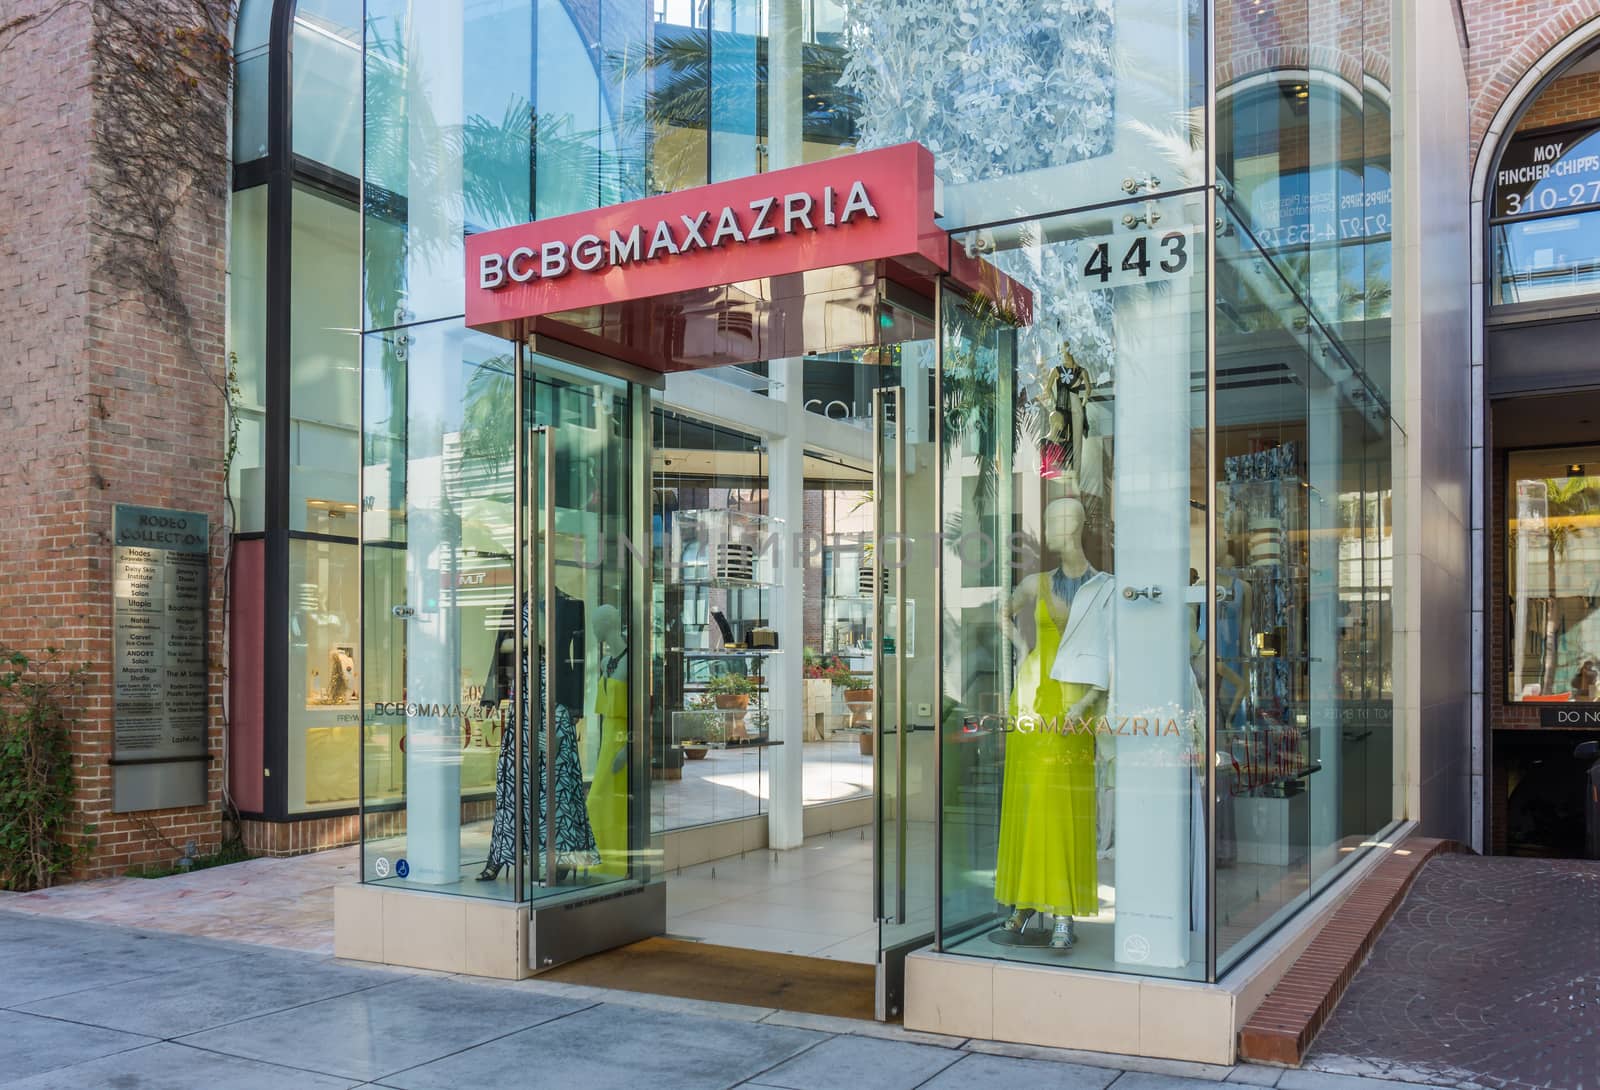 BEVERLY HILLS, CA/USA - JANUARY 3, 2015: BCBG Max Azria retail store exterior. BCBG Max Azria is a global fashion house based in Los Angeles.